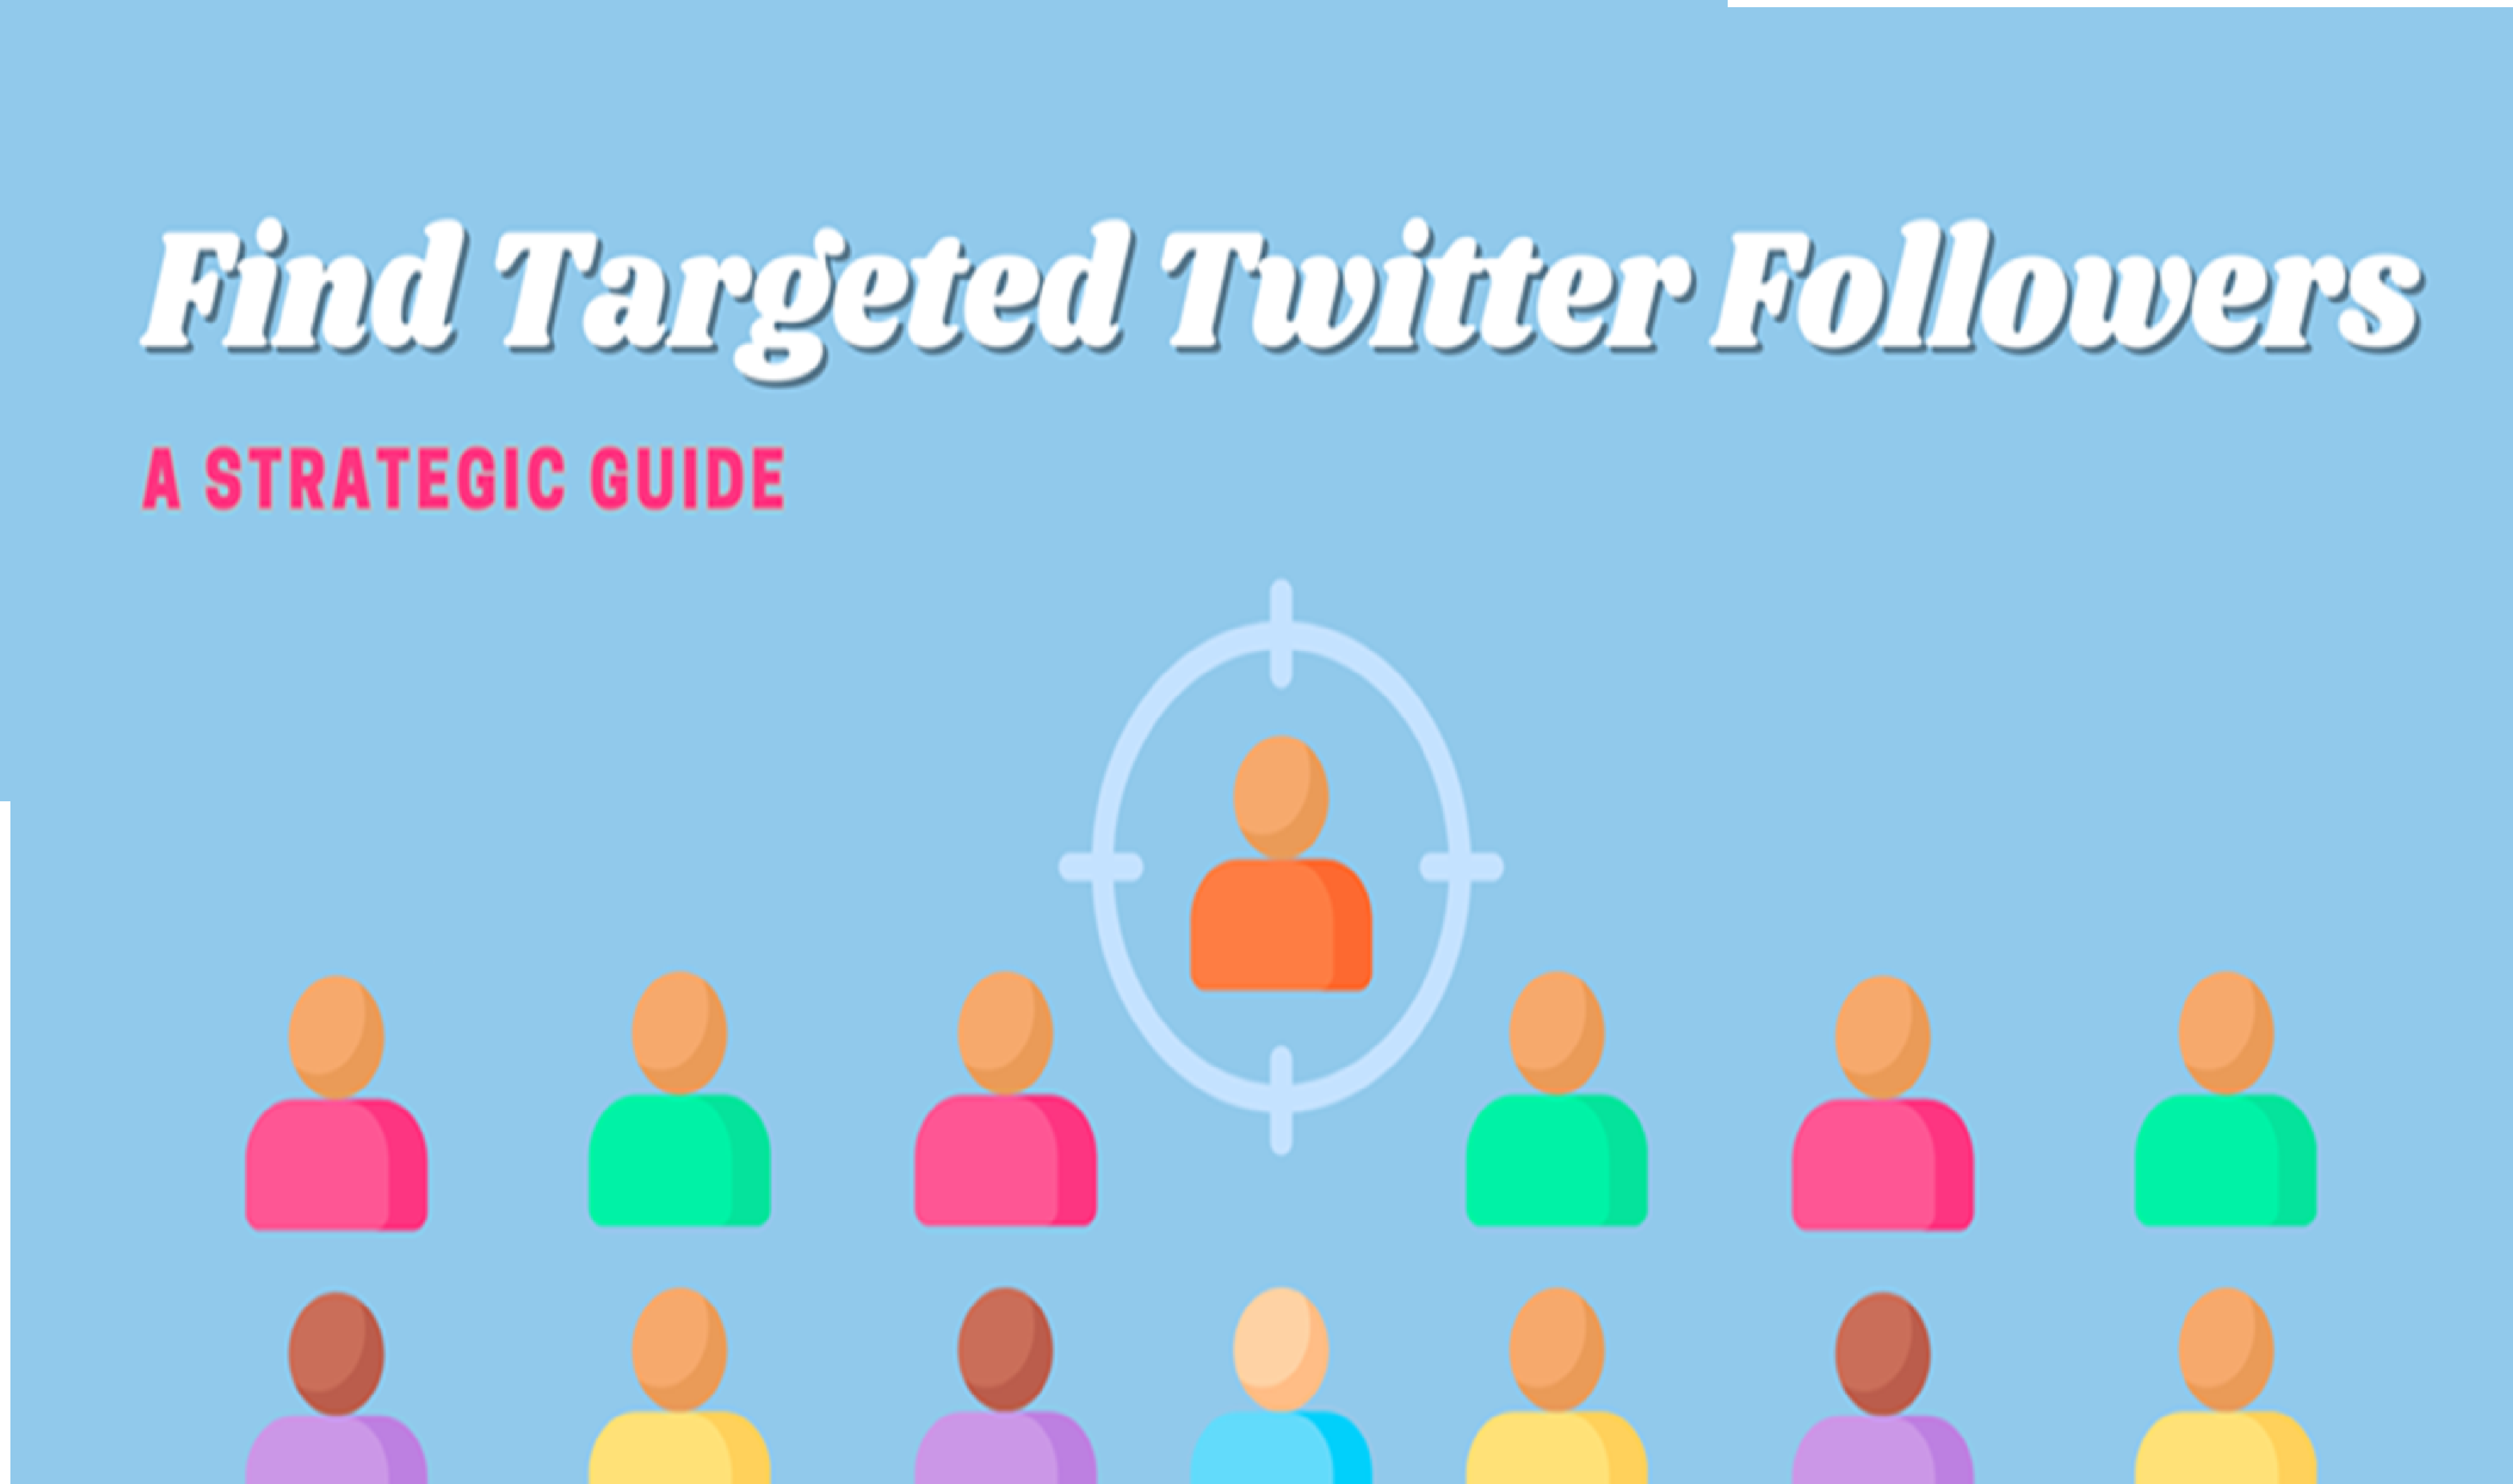 Find Targeted Twitter Followers: A Strategic Guide